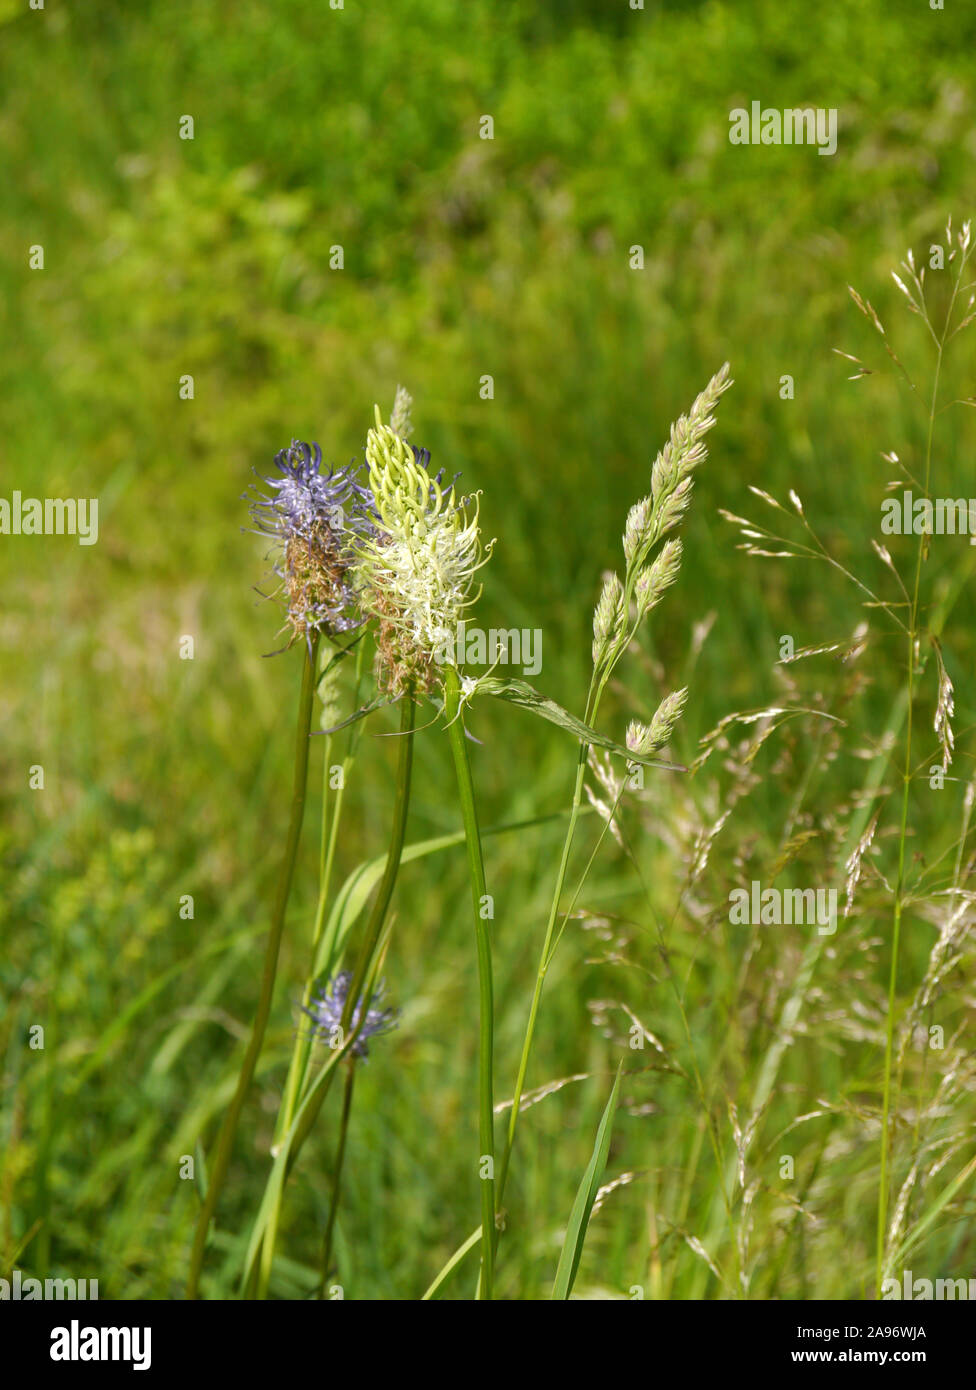 spiked rampion, Phyteuma spicatum with white and blue colors Stock Photo